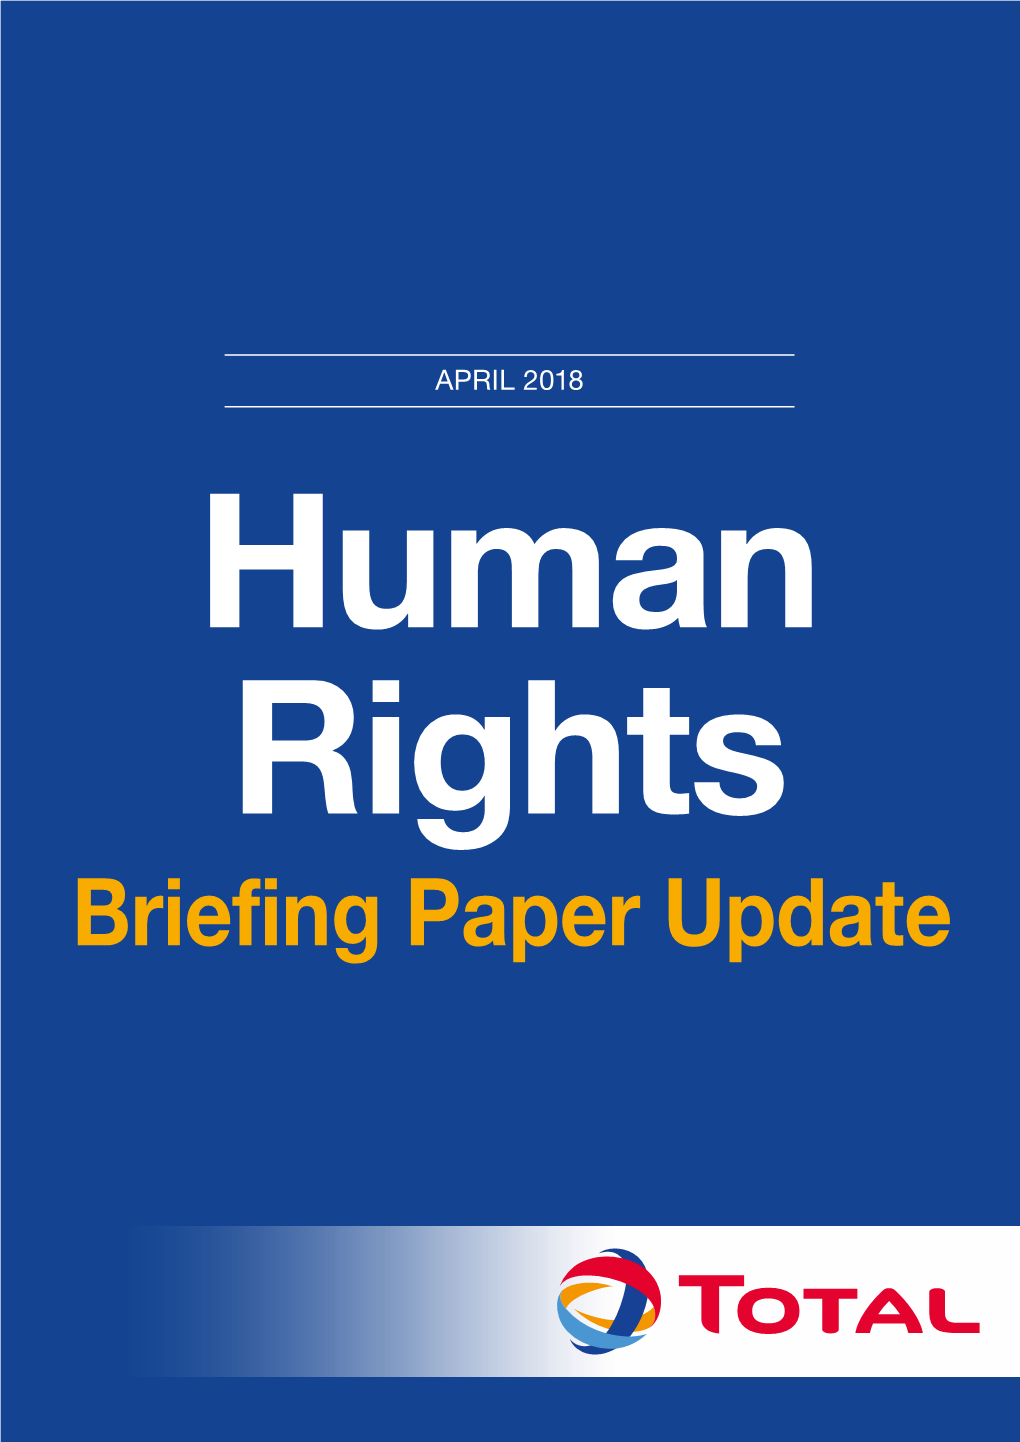 Briefing Paper Update 2 • TOTAL’S HUMAN RIGHTS BRIEFING PAPER UPDATE TOTAL’S HUMAN RIGHTS BRIEFING PAPER UPDATE • 3